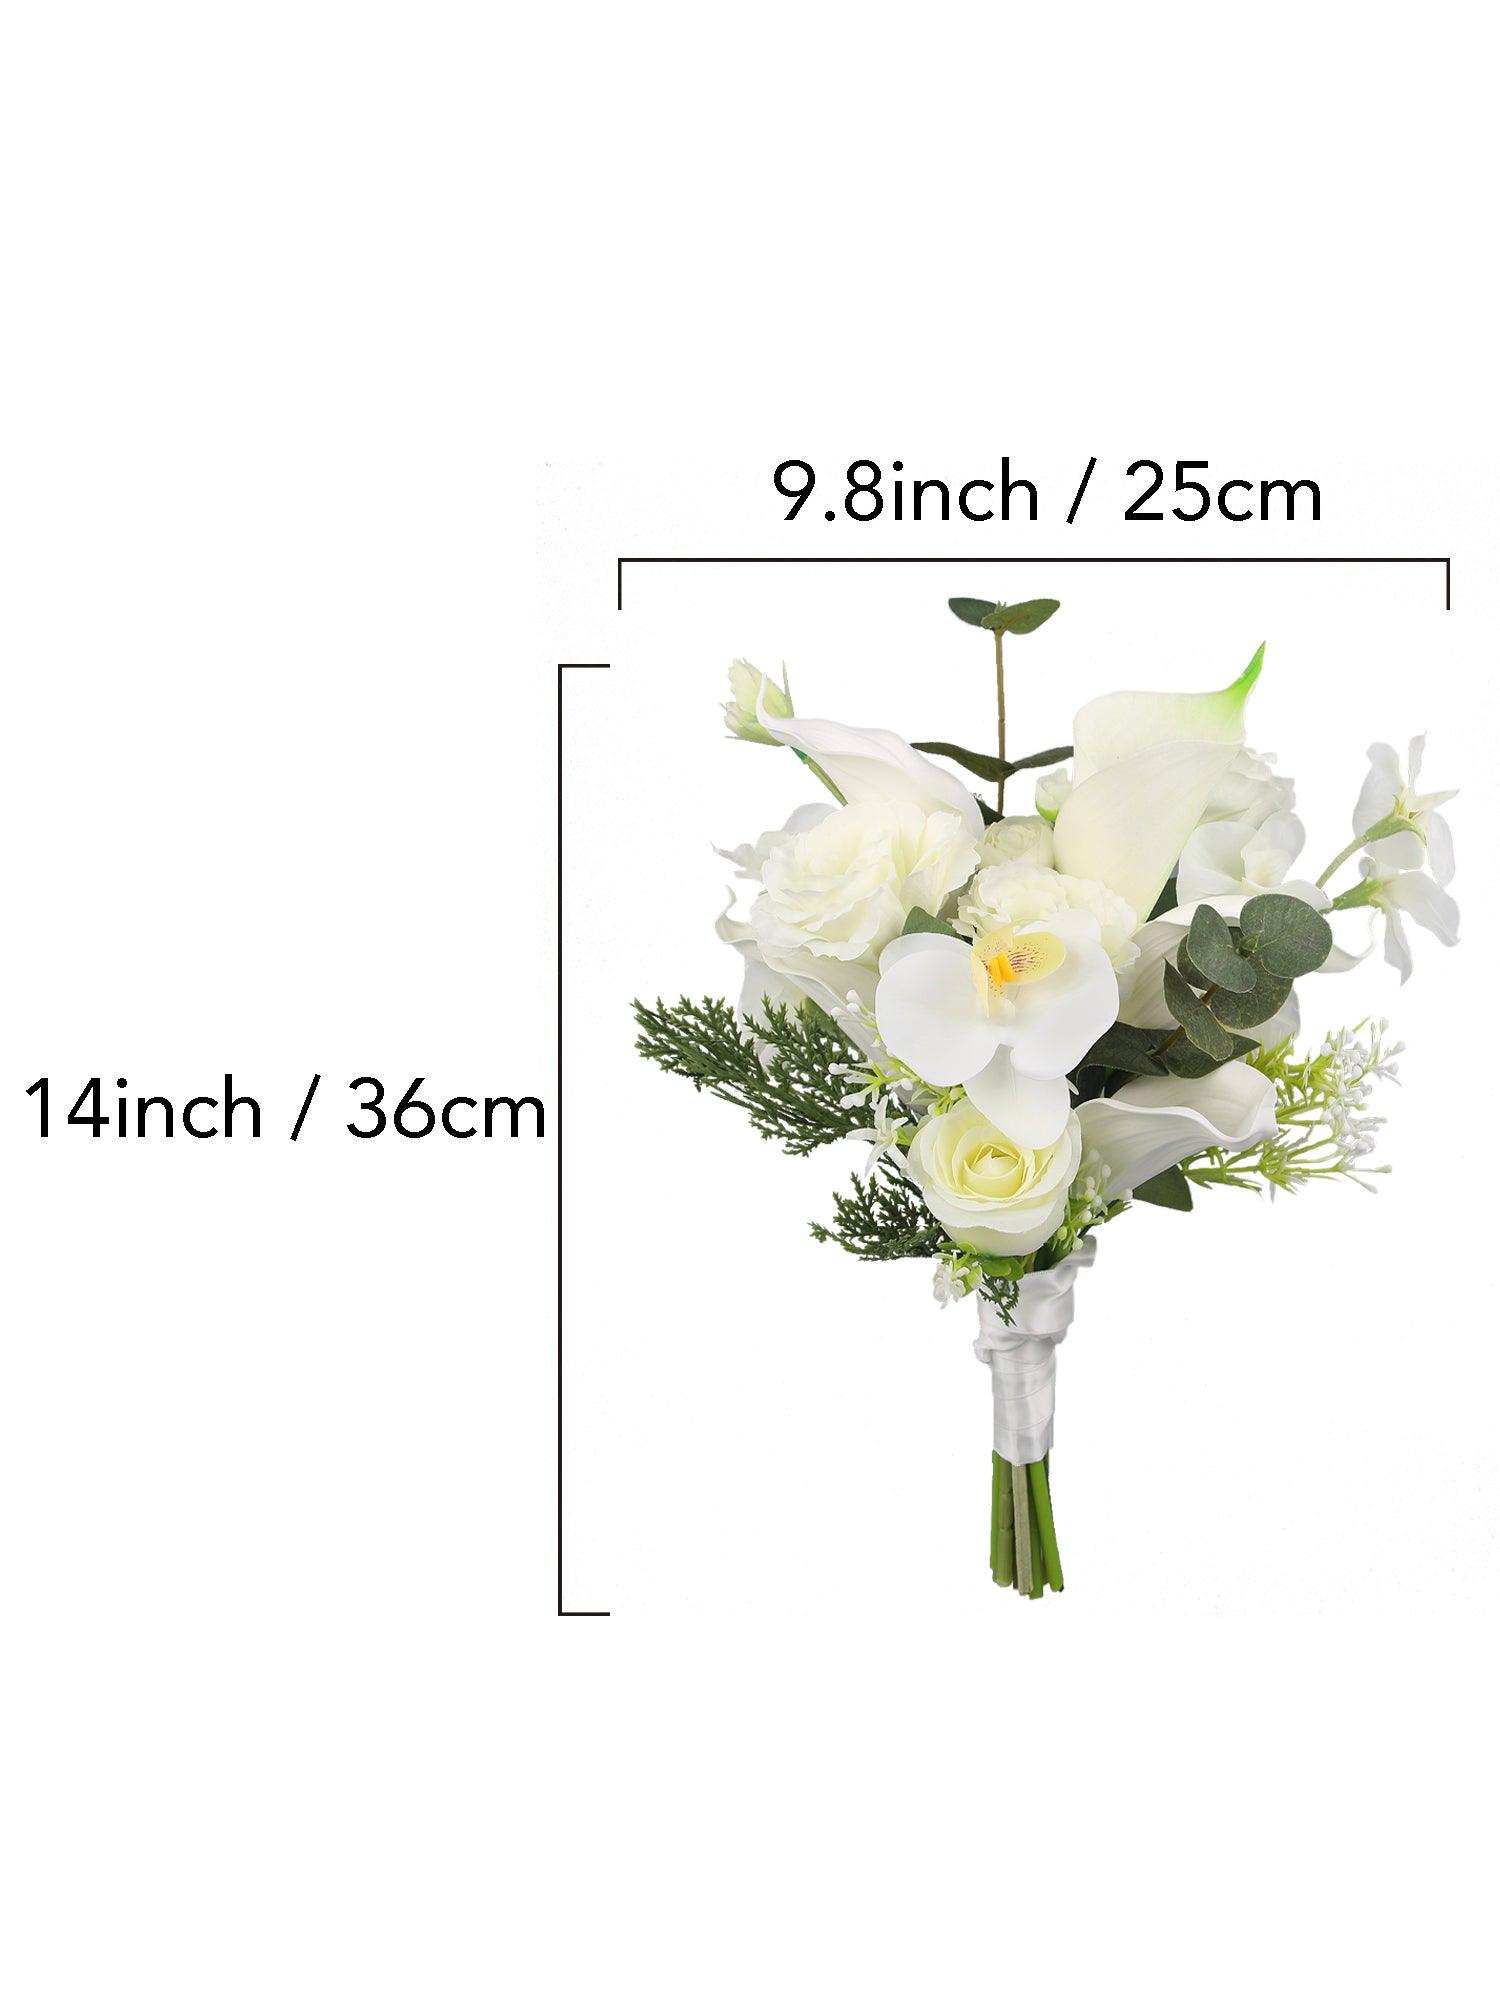 9.8 inch wide White Rose & Orchid Bridal Bouquet - Rinlong Flower